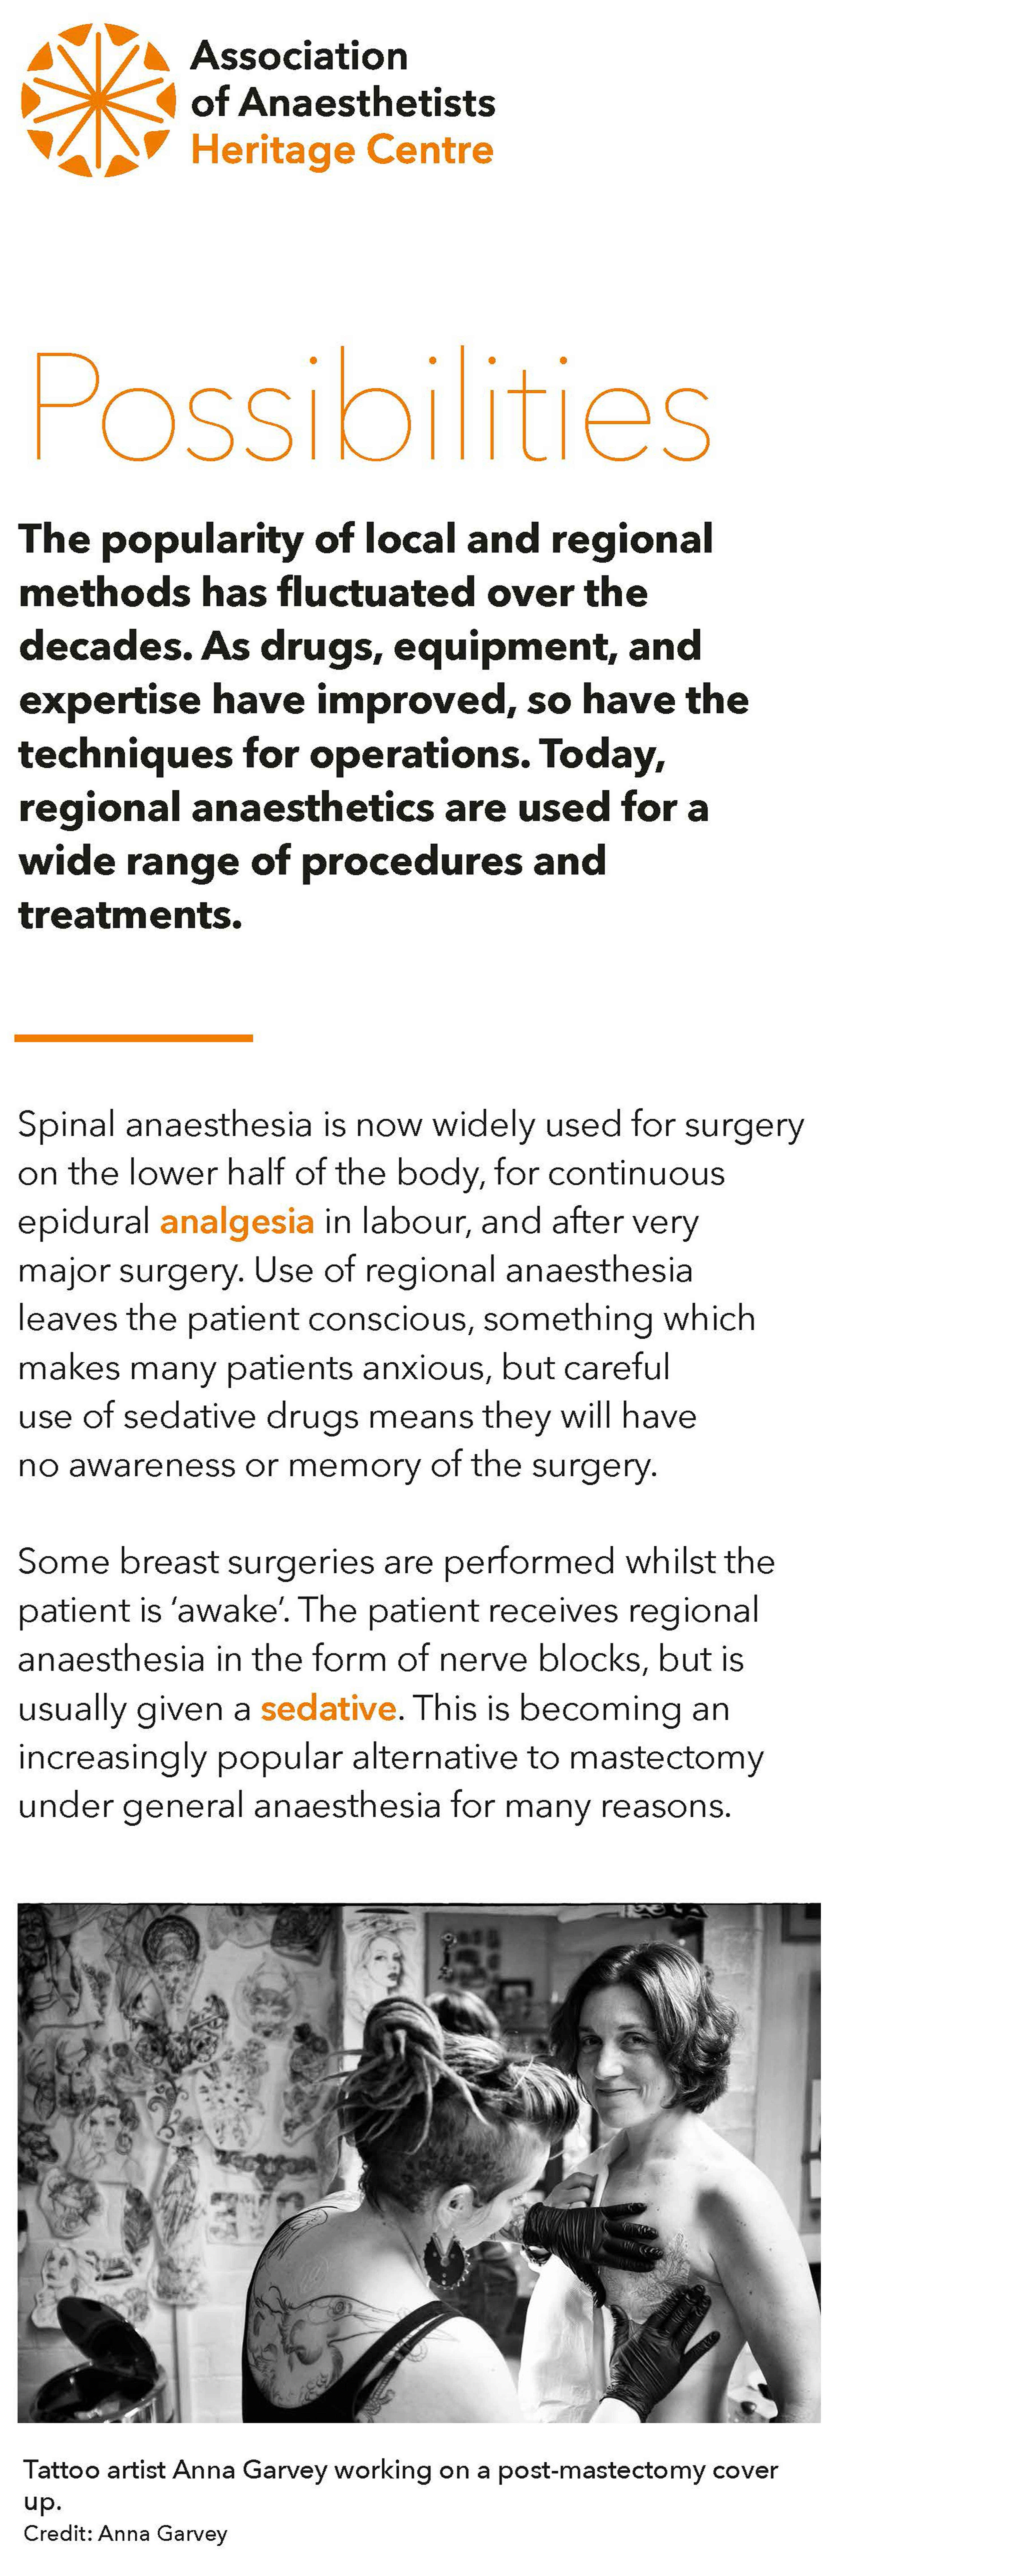 Possibilities The popularity of local and regional methods has fluctuated over the decades. As drugs, equipment, and expertise have improved, so have the techniques for operations. Today, regional anaesthetics are used for a wide range of procedures and treatments. Spinal anaesthesia is now widely used for surgery on the lower half of the body, for continuous epidural analgesia in labour, and after very major surgery. Use of regional anaesthesia leaves the patient conscious, something which makes many patients anxious, but careful use of sedative drugs means they will have no awareness or memory of the surgery. Some breast surgeries are performed whilst the patient is ‘awake’. The patient receives regional anaesthesia in the form of nerve blocks, but is usually given a sedative. This is becoming an increasingly popular alternative to mastectomy under general anaesthesia for many reasons. Anna Garvey: Tattoo artist Anna Garvey working on a post-mastectomy cover up